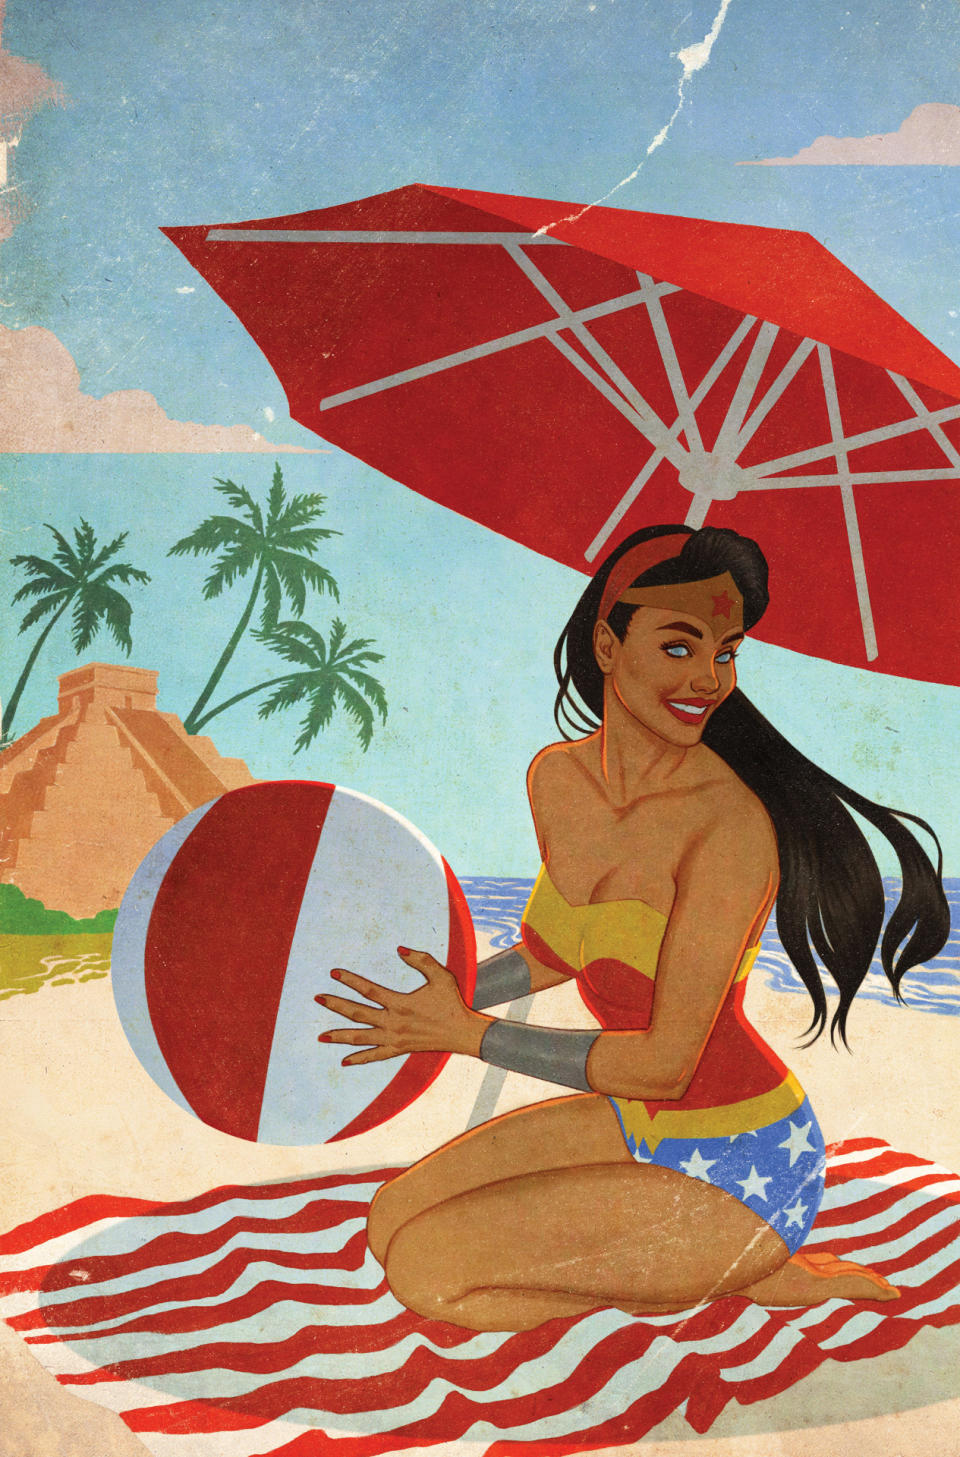 G'nort's Illustrated Swimsuit Special pin-up